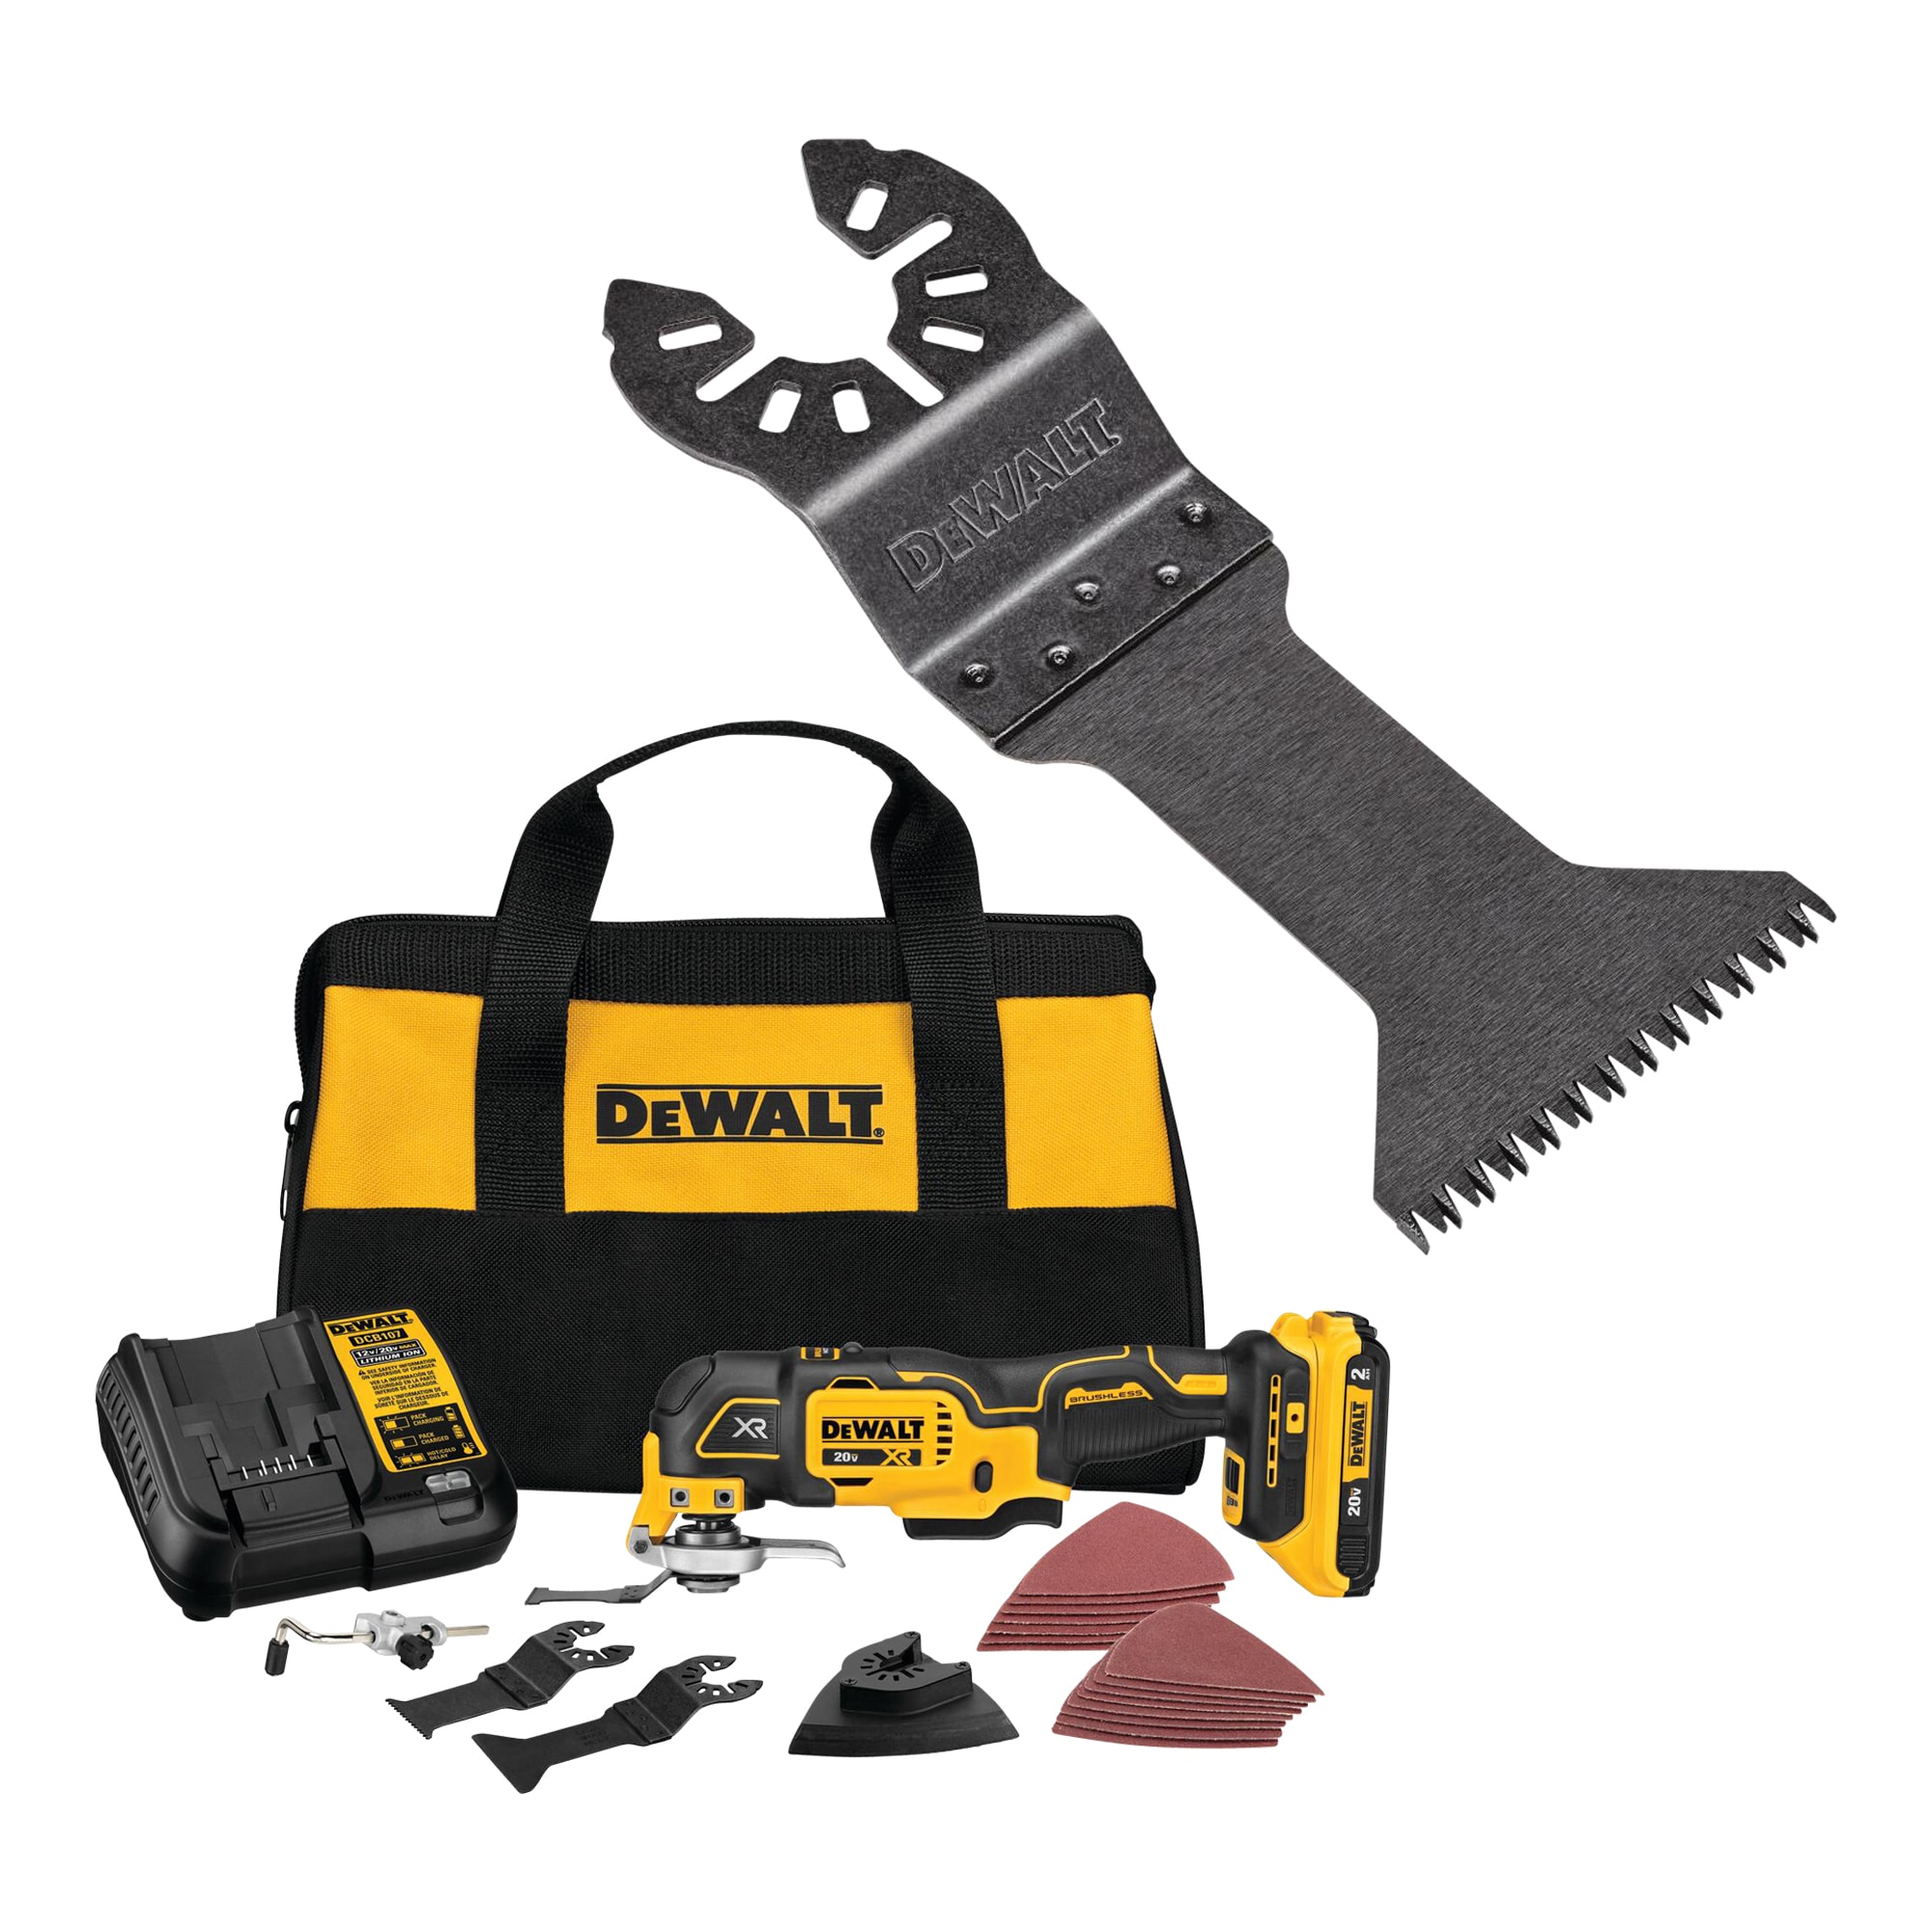 DEWALT XR 3-Piece Deep Cut Precision Blade & XR 8-Piece Brushless 20-volt Max 3-speed Oscillating Multi-Tool Kit with Soft Case (1-Battery Included)